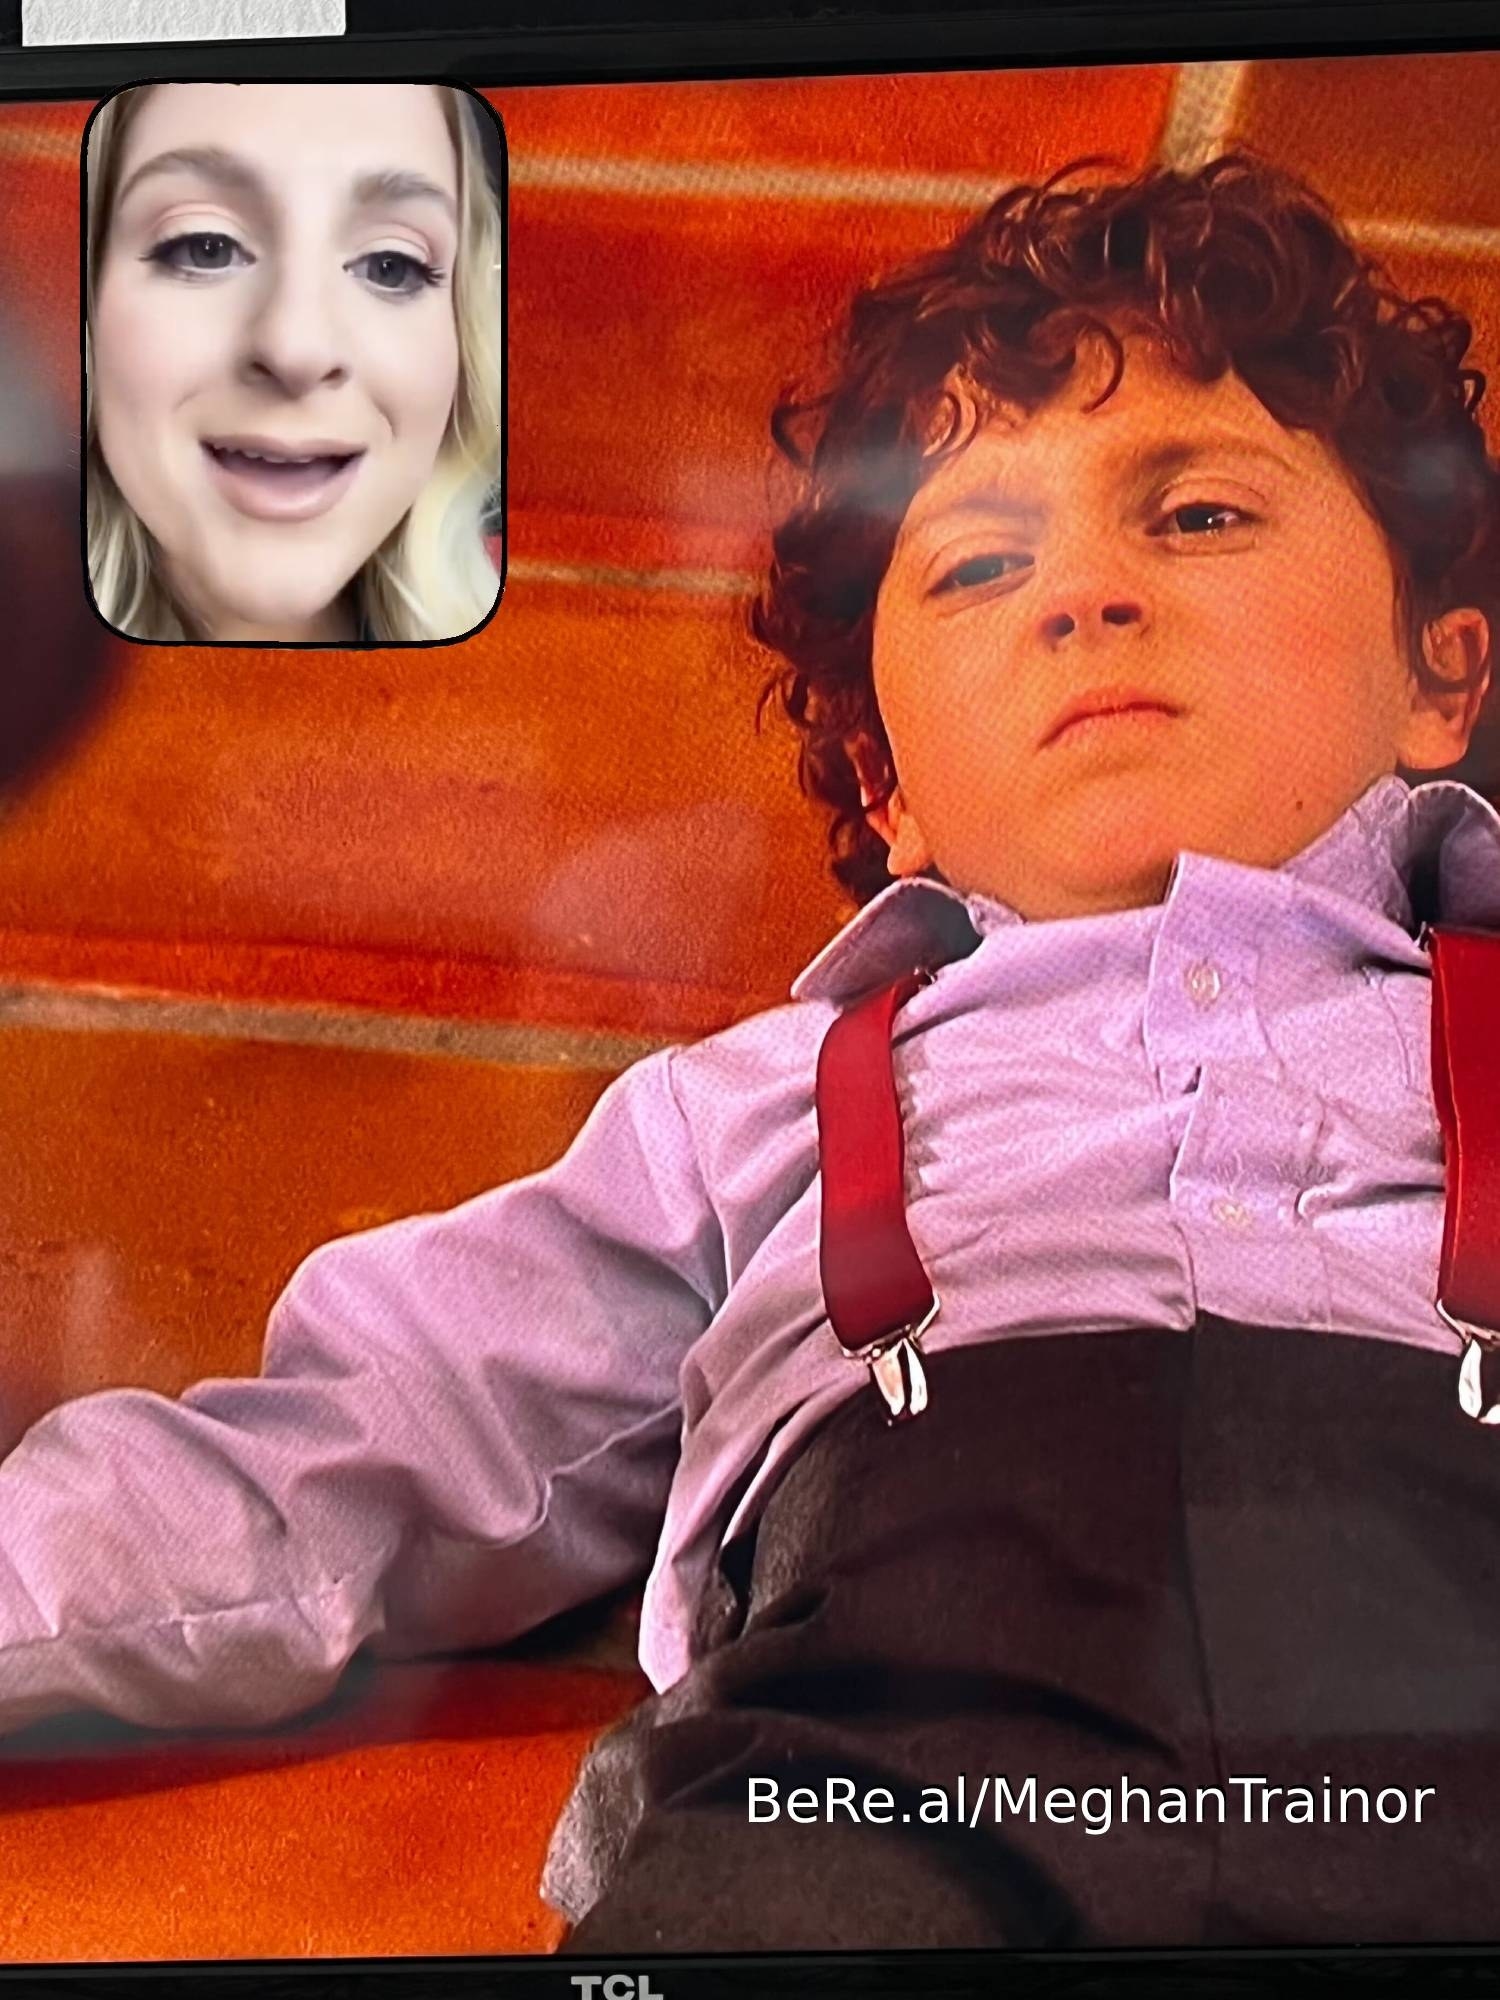 Meghan Trainor smiling at a clip of her husband, Daryl Sabara, as a child actor in Spy Kids